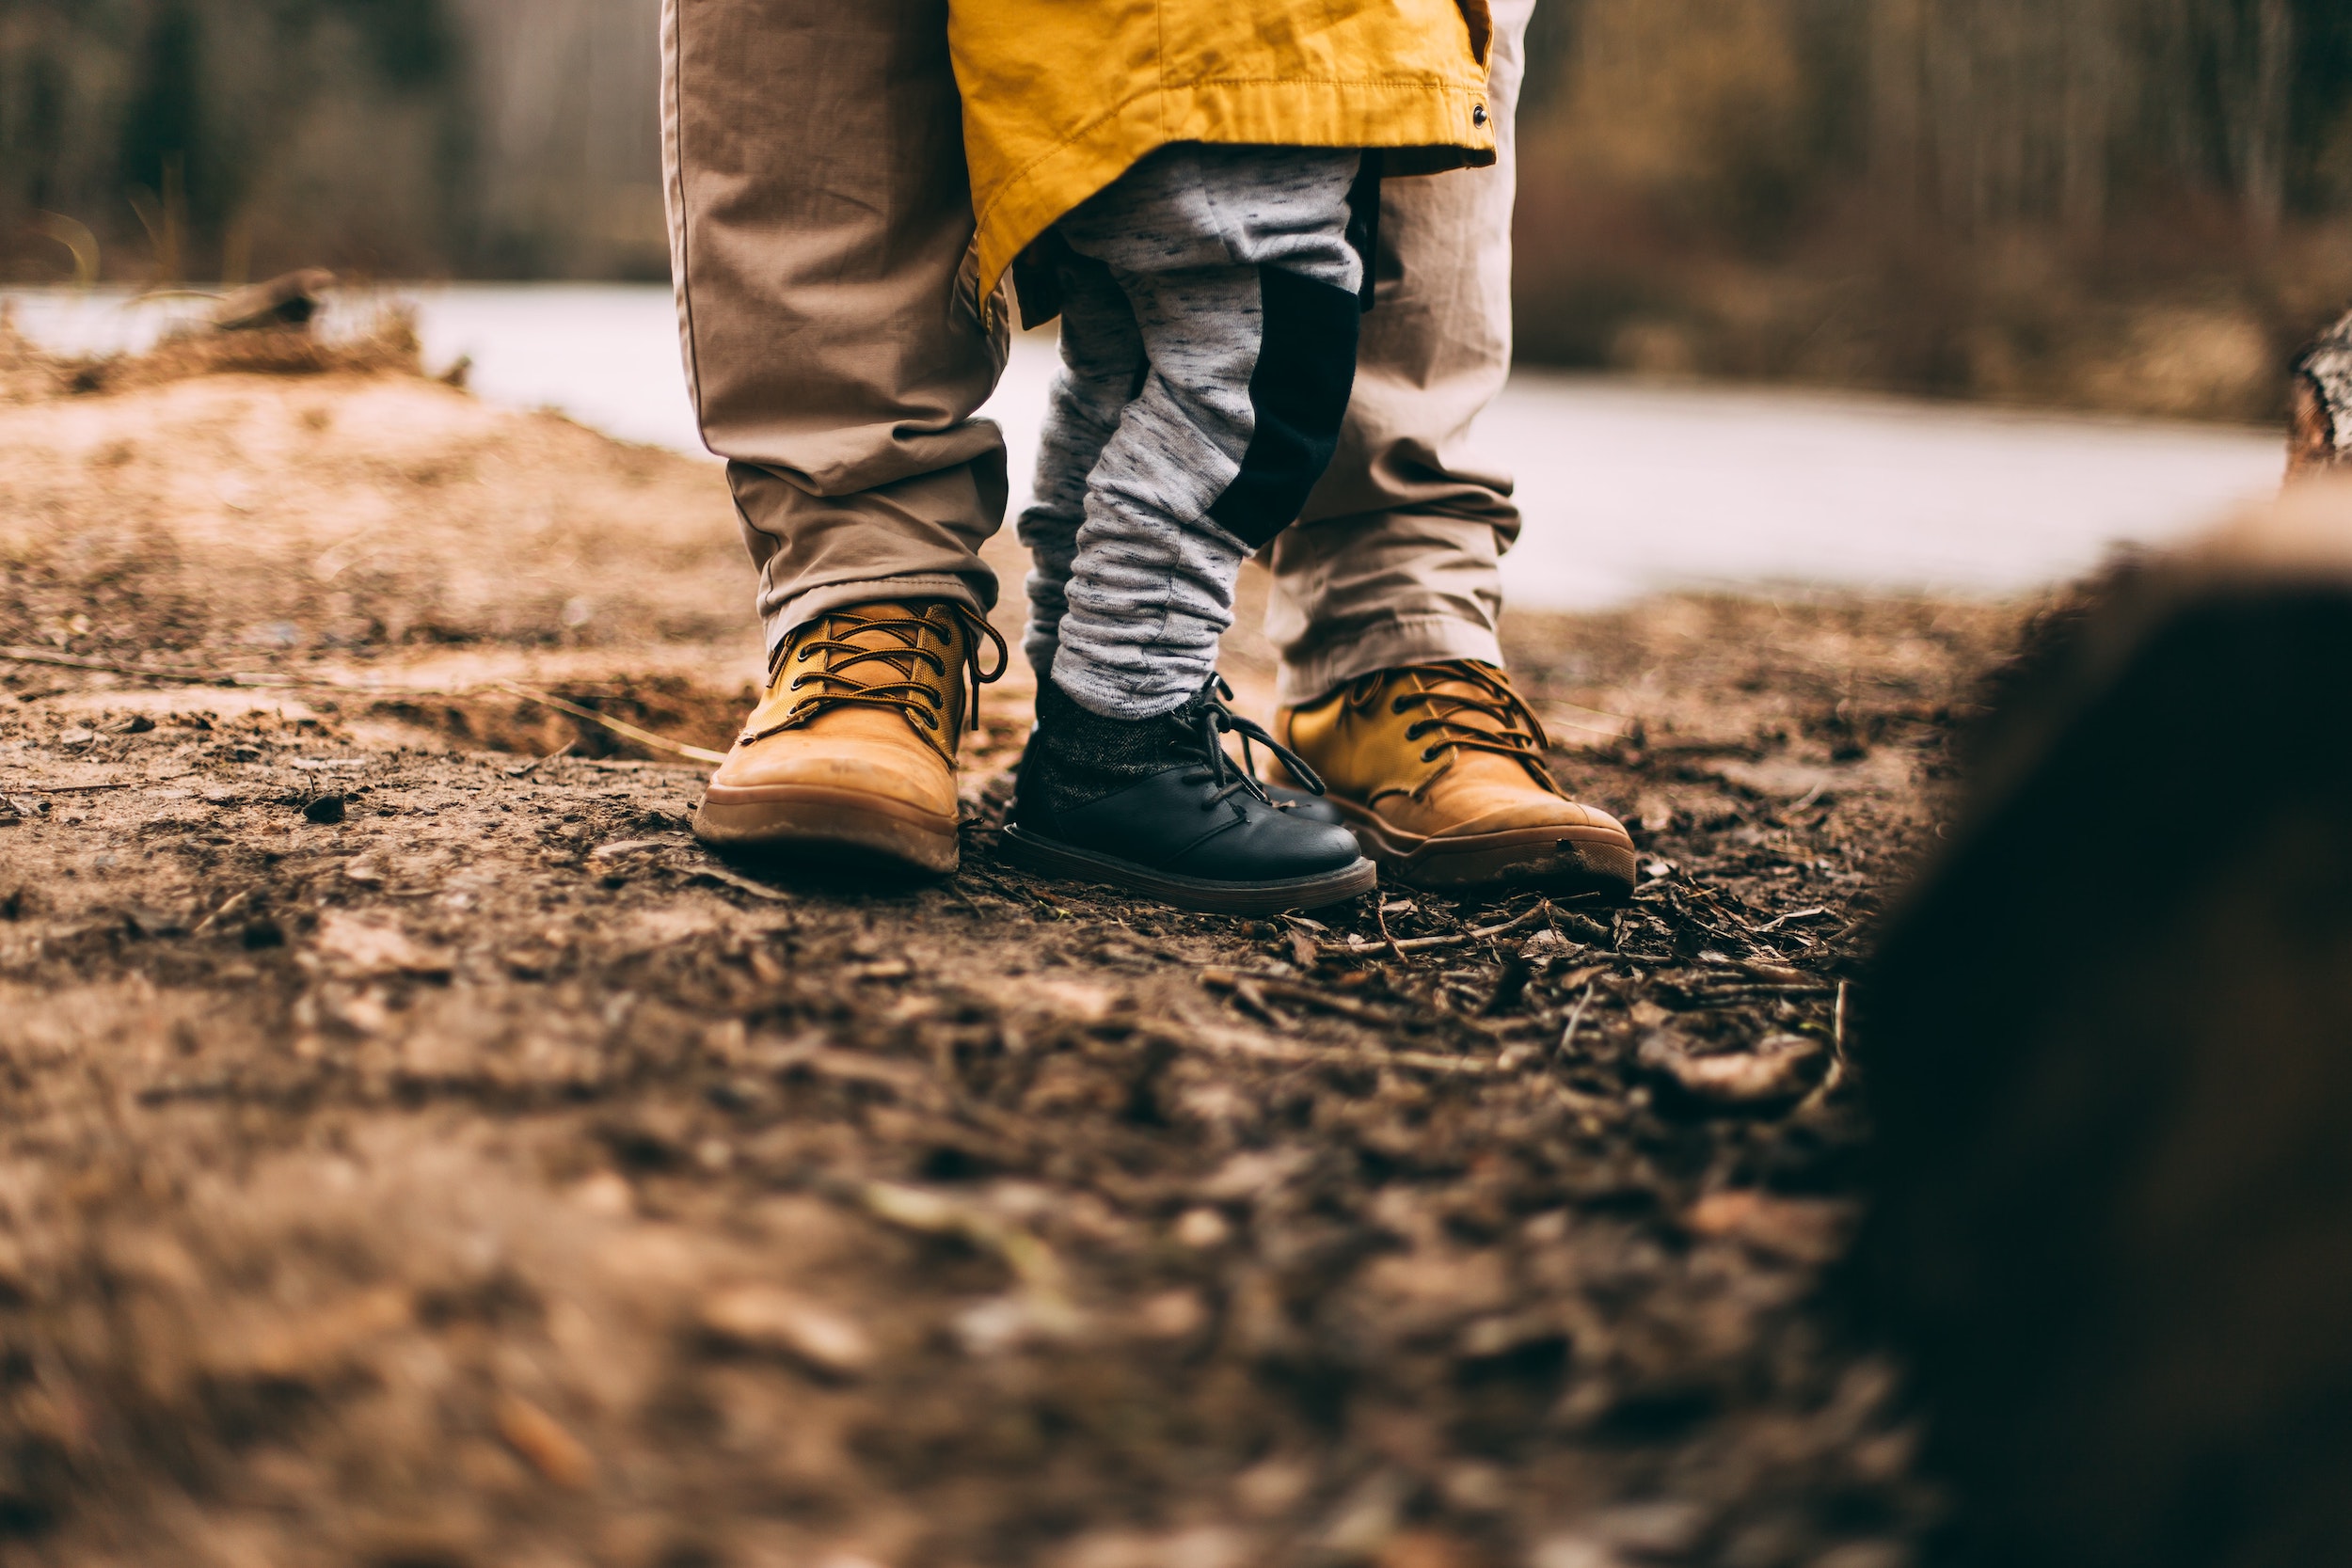 Micklin Law Group-5 Valuable Child Custody Insights for Divorcing Dads